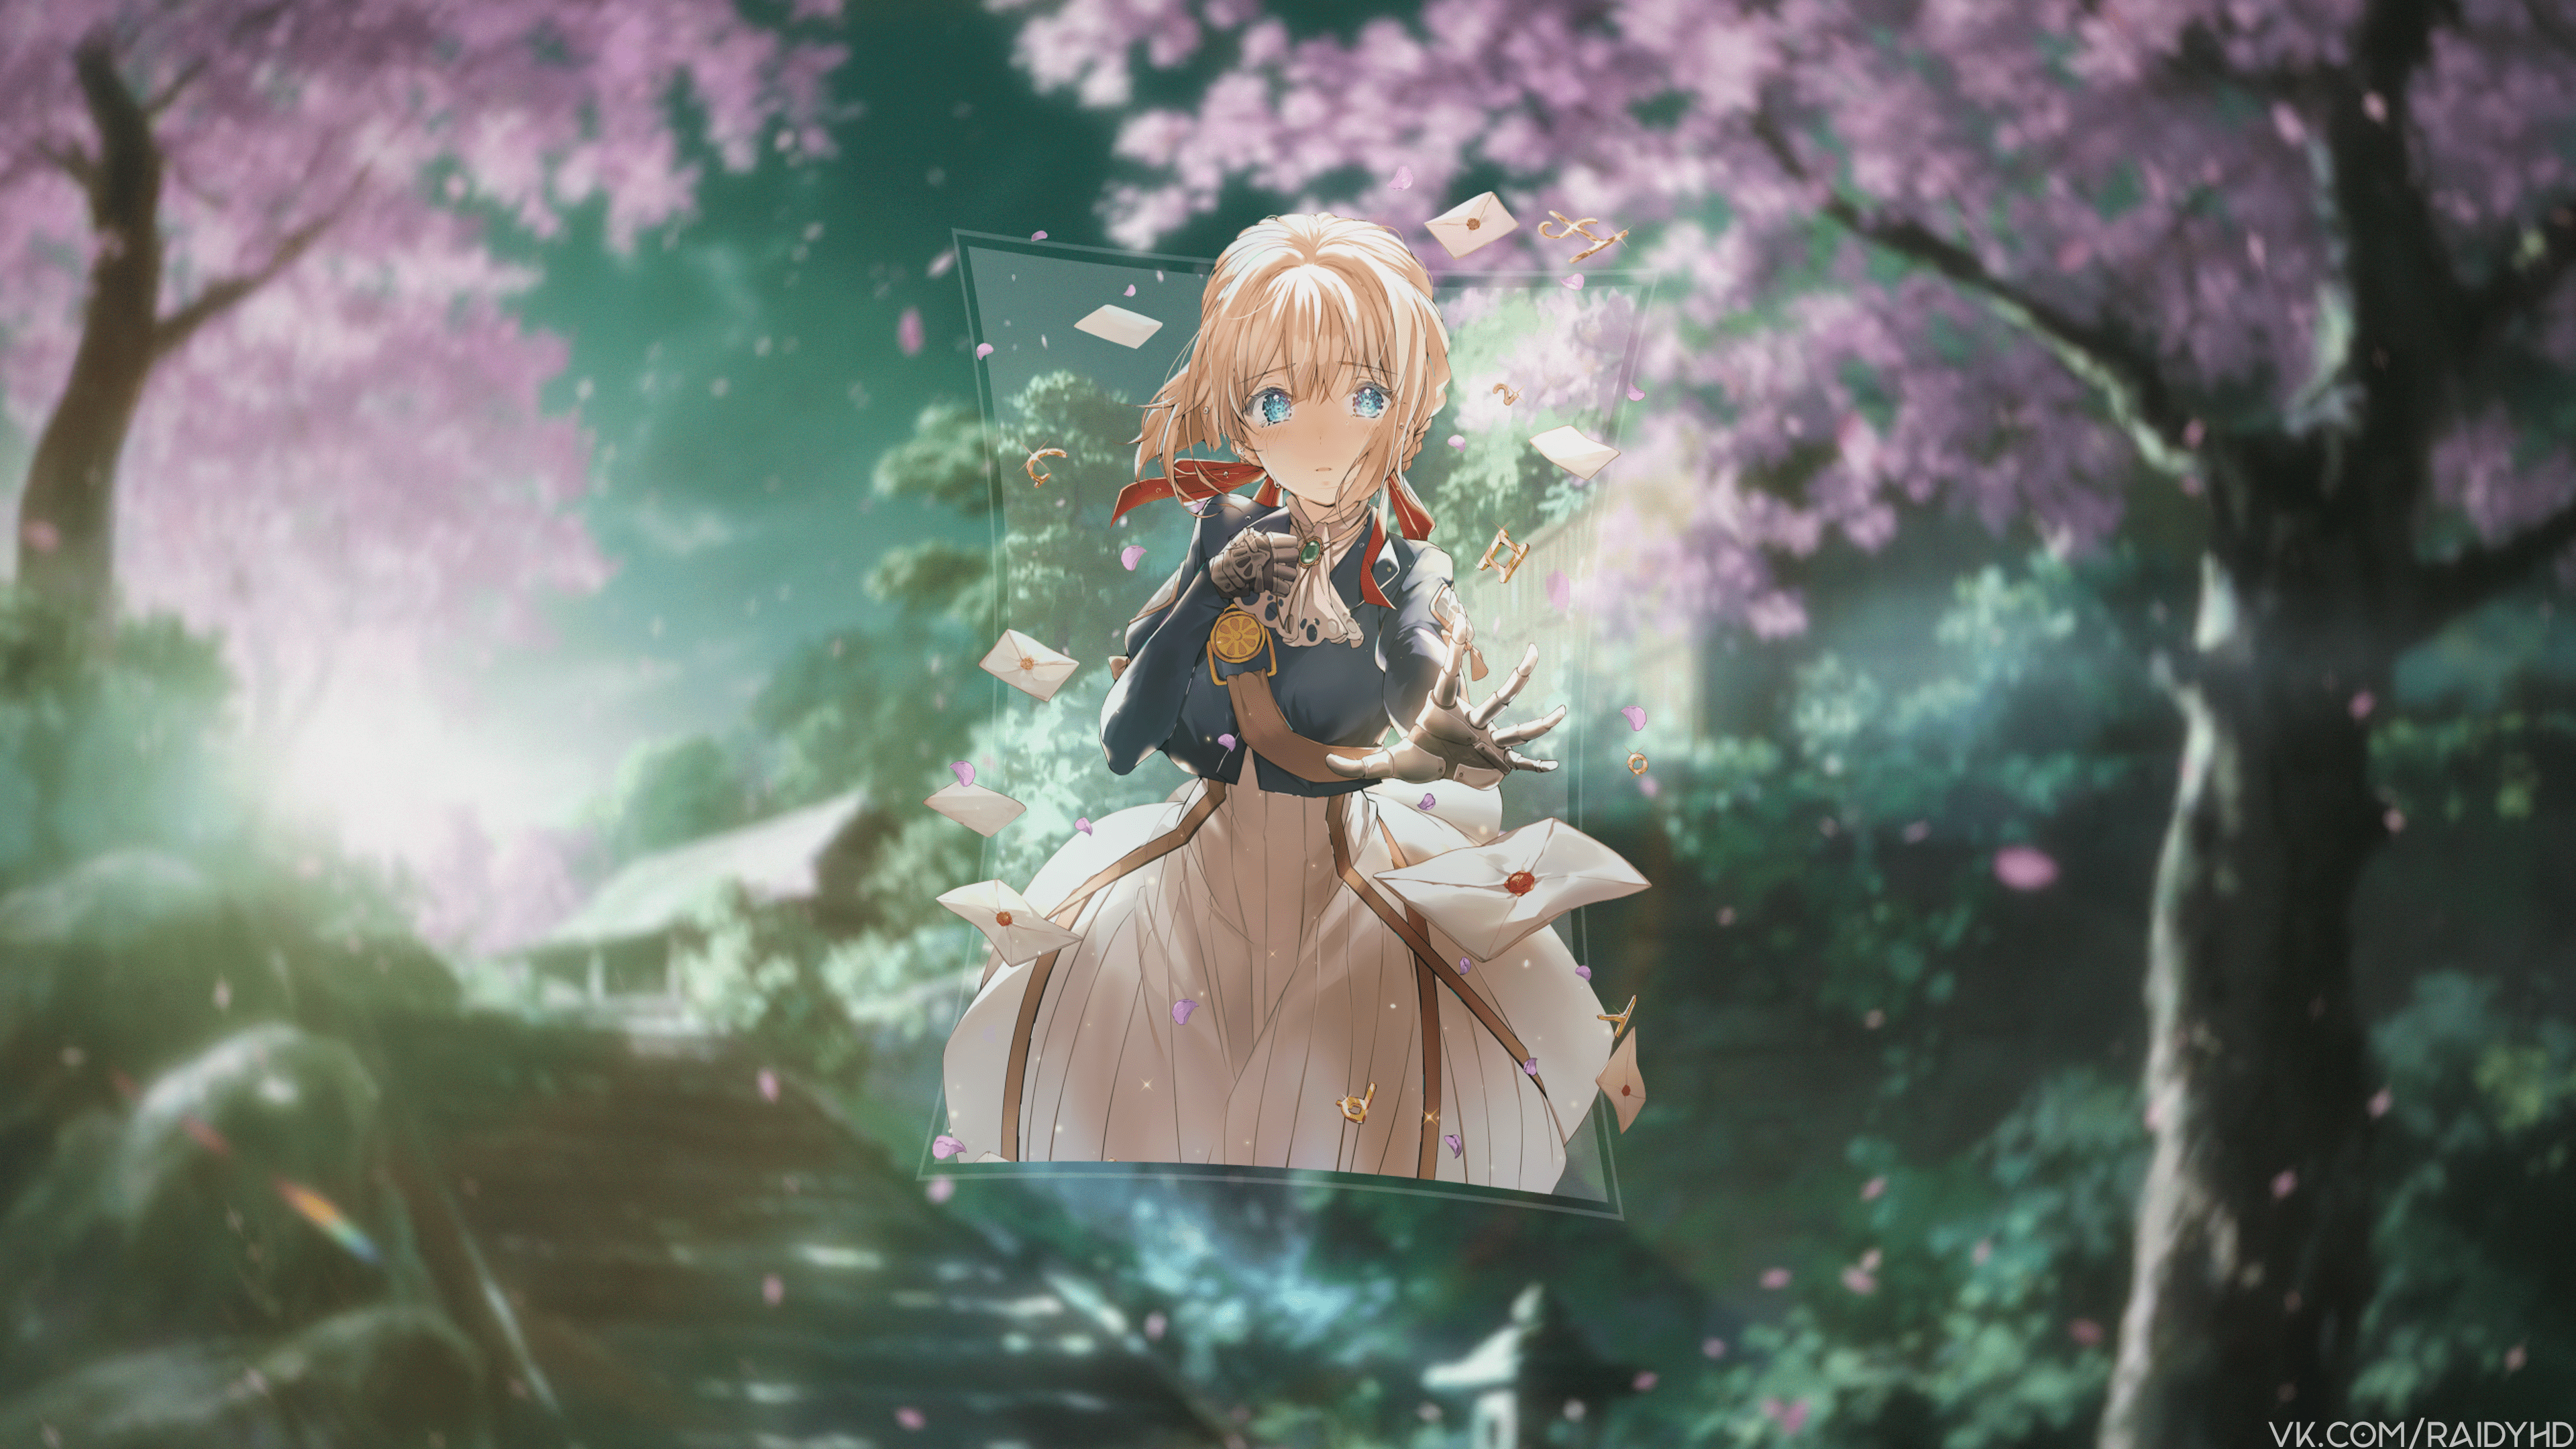 Anime 3840x2160 Violet Evergarden anime girls anime picture-in-picture